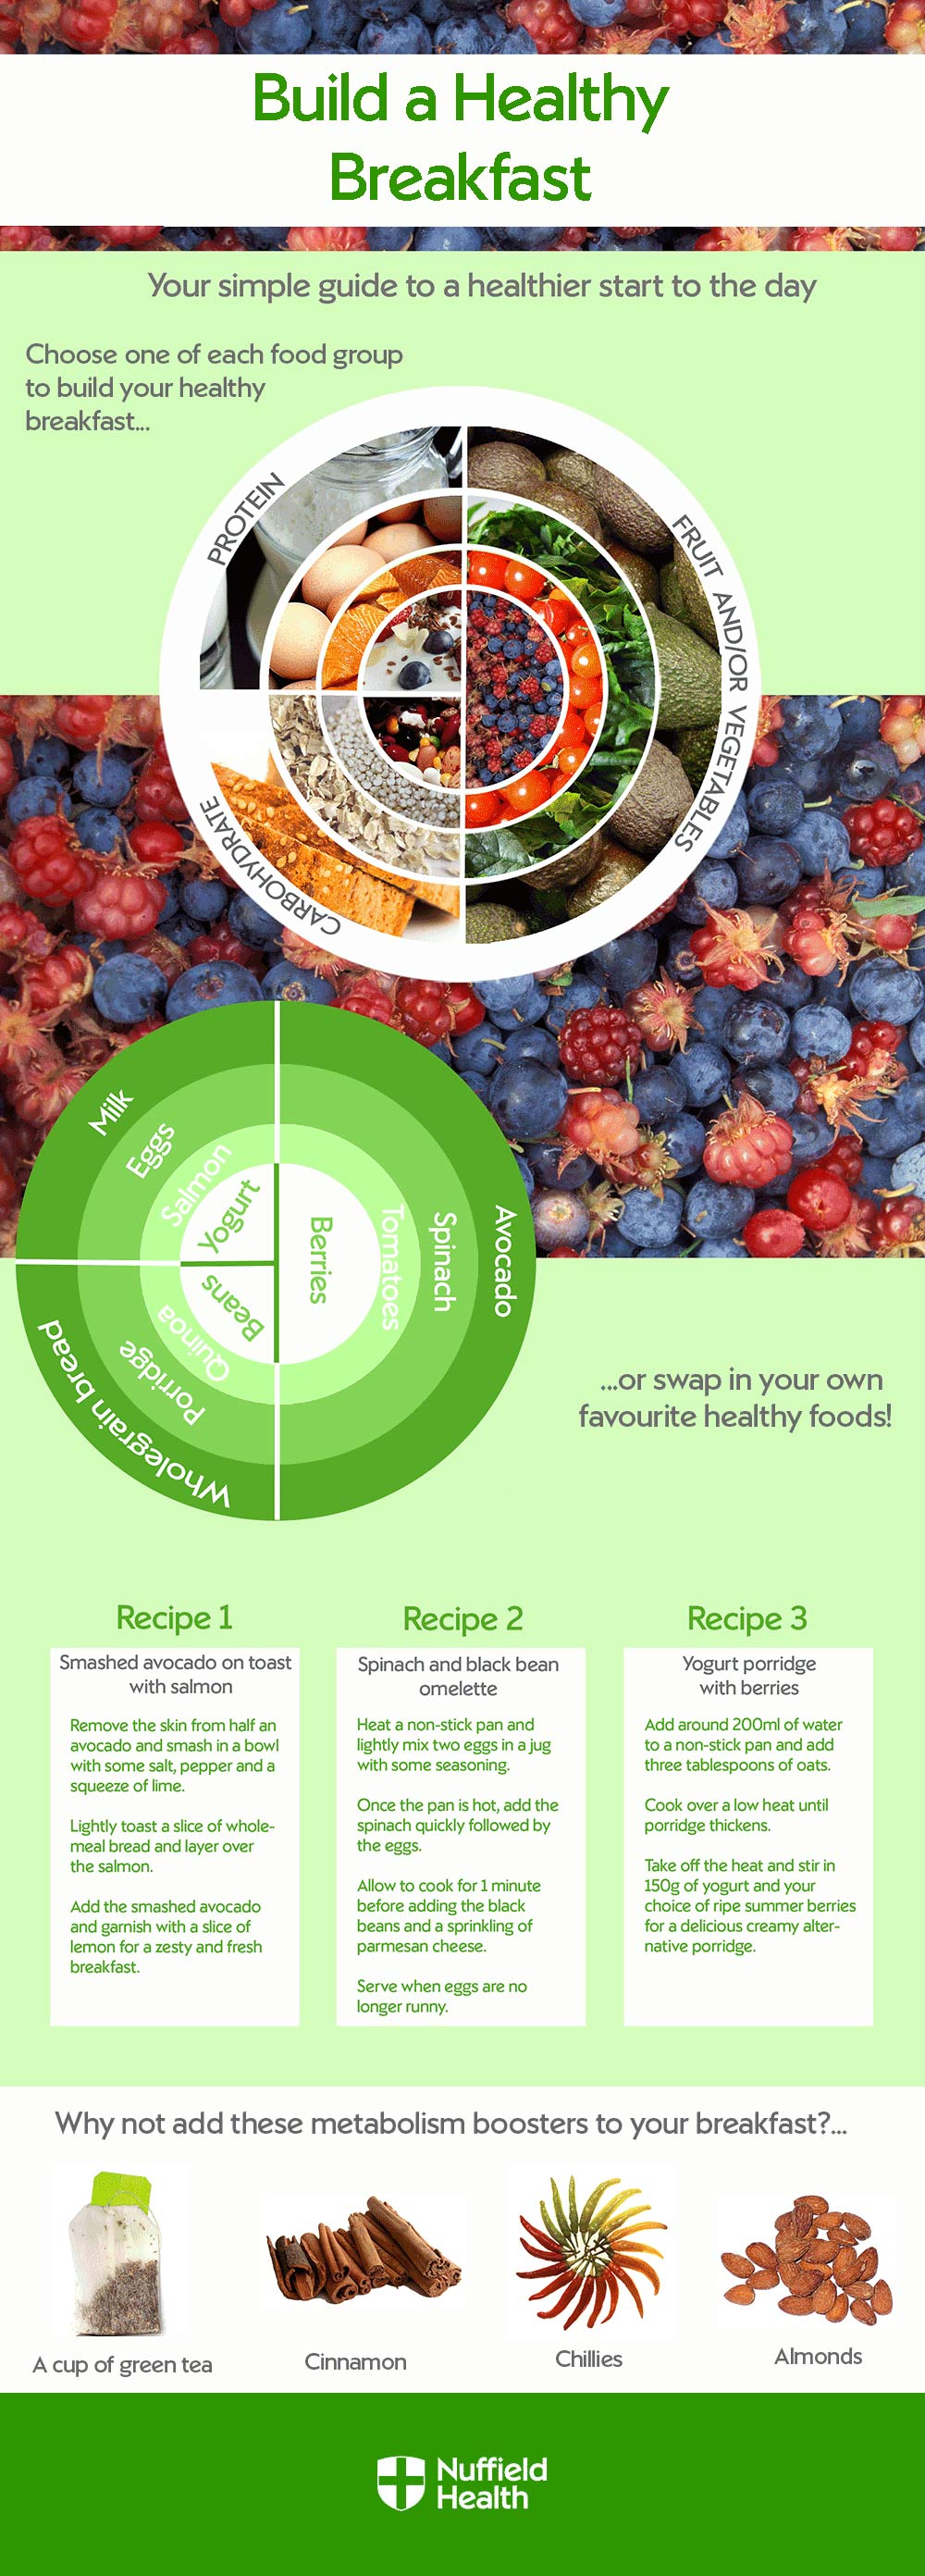 Build a healthy breakfast infographic 2018